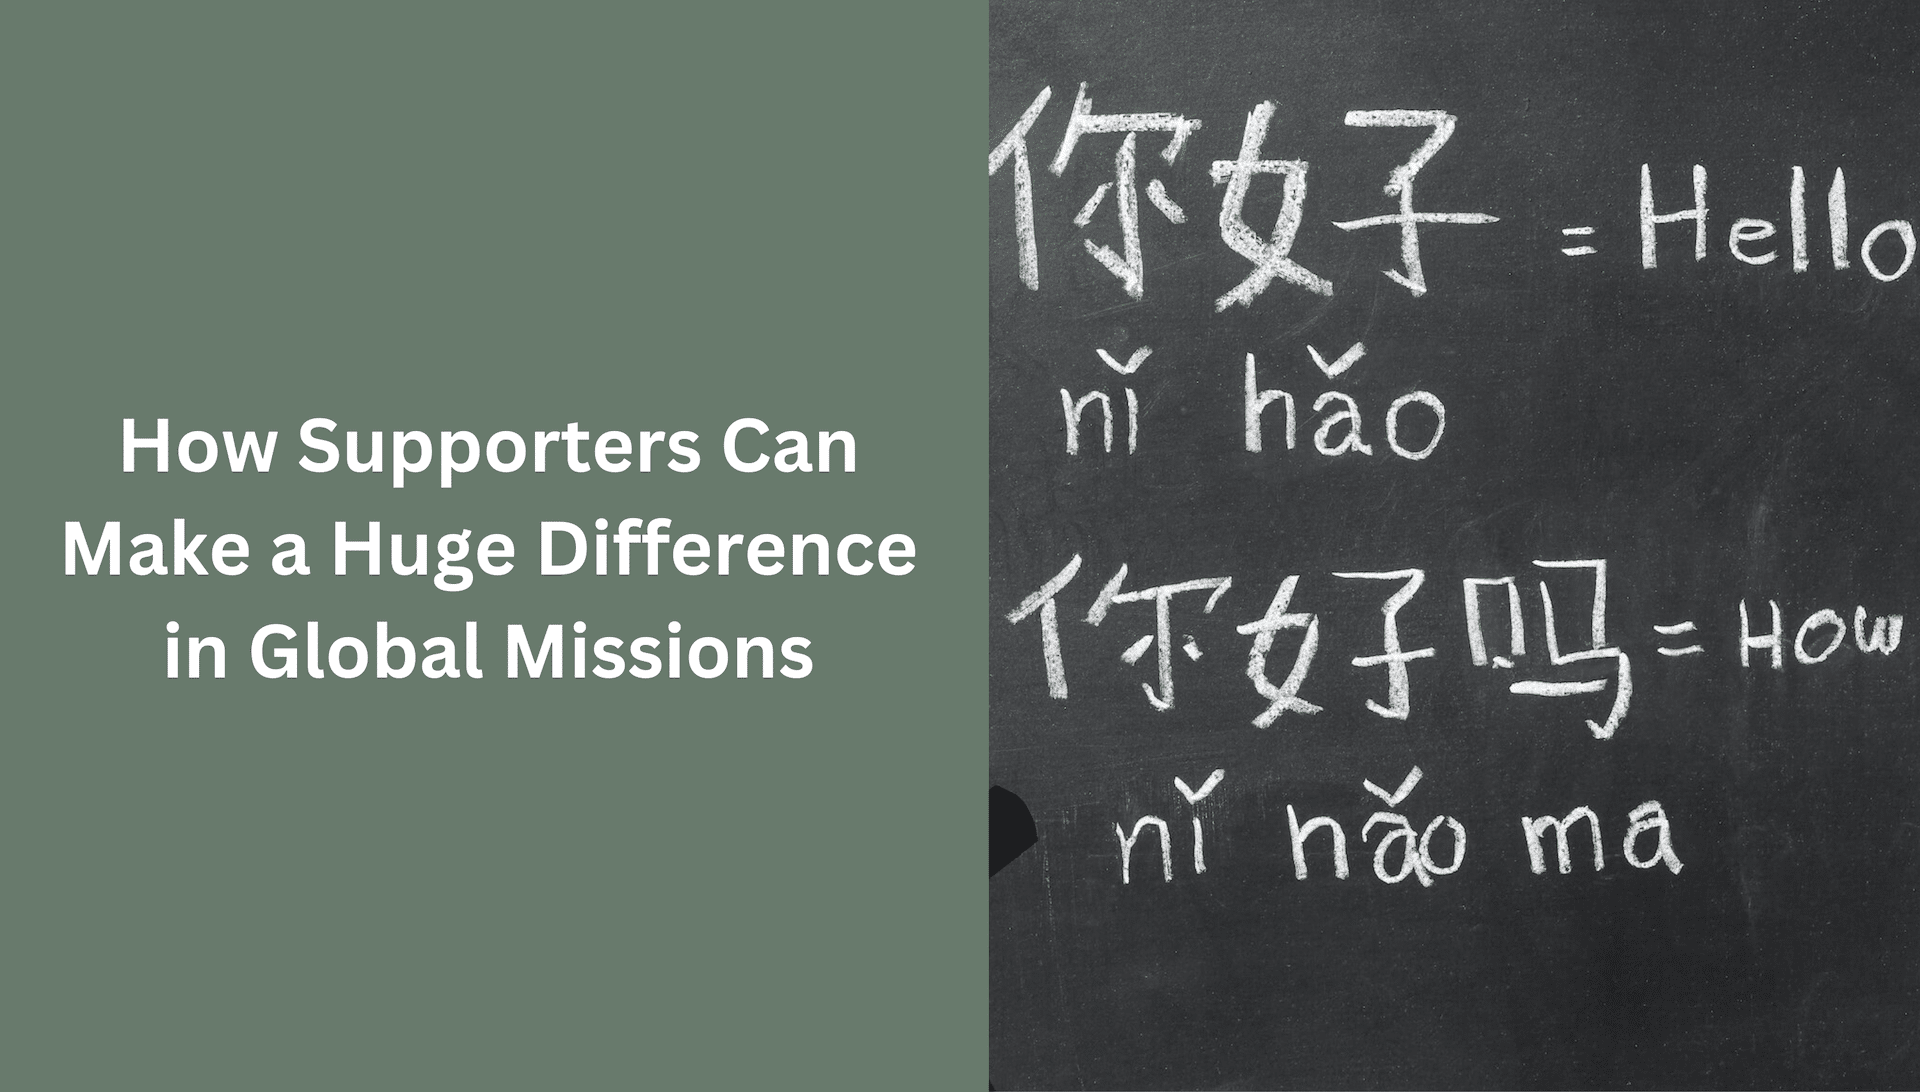 How Supporters Can Make a Huge Difference in Global Missions